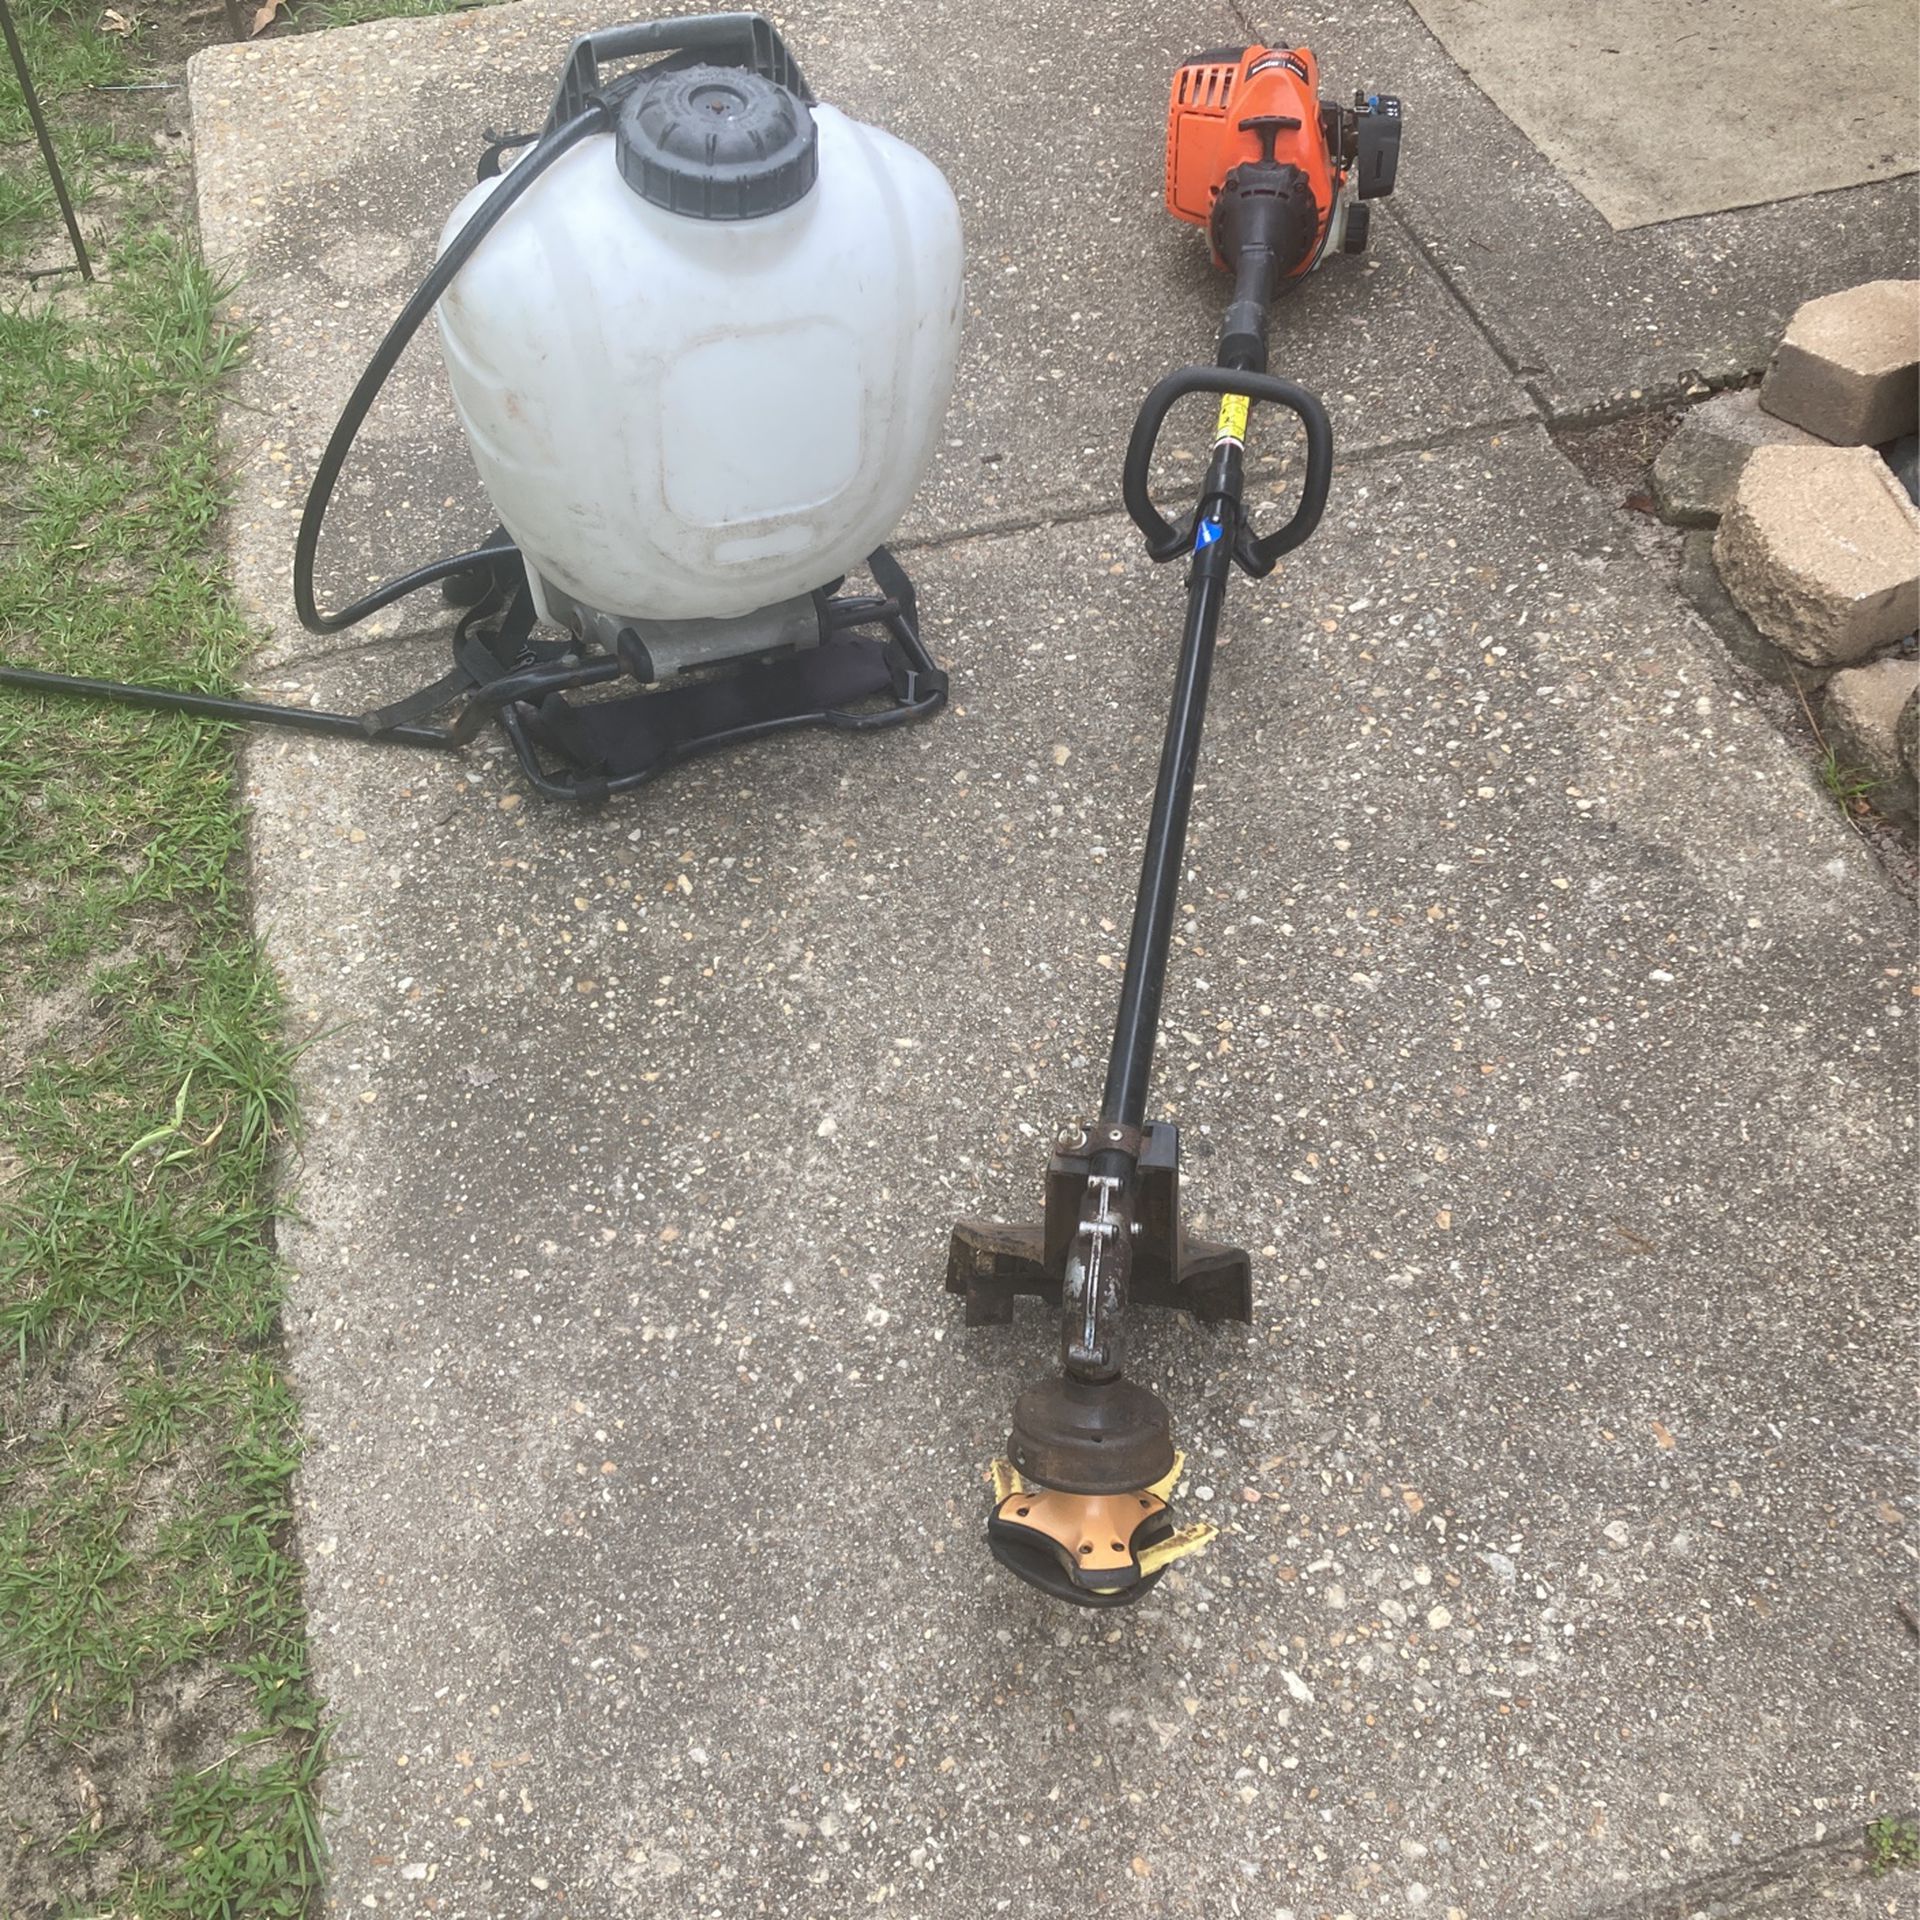 Remington Weed Eater and Backpack Sprayer 